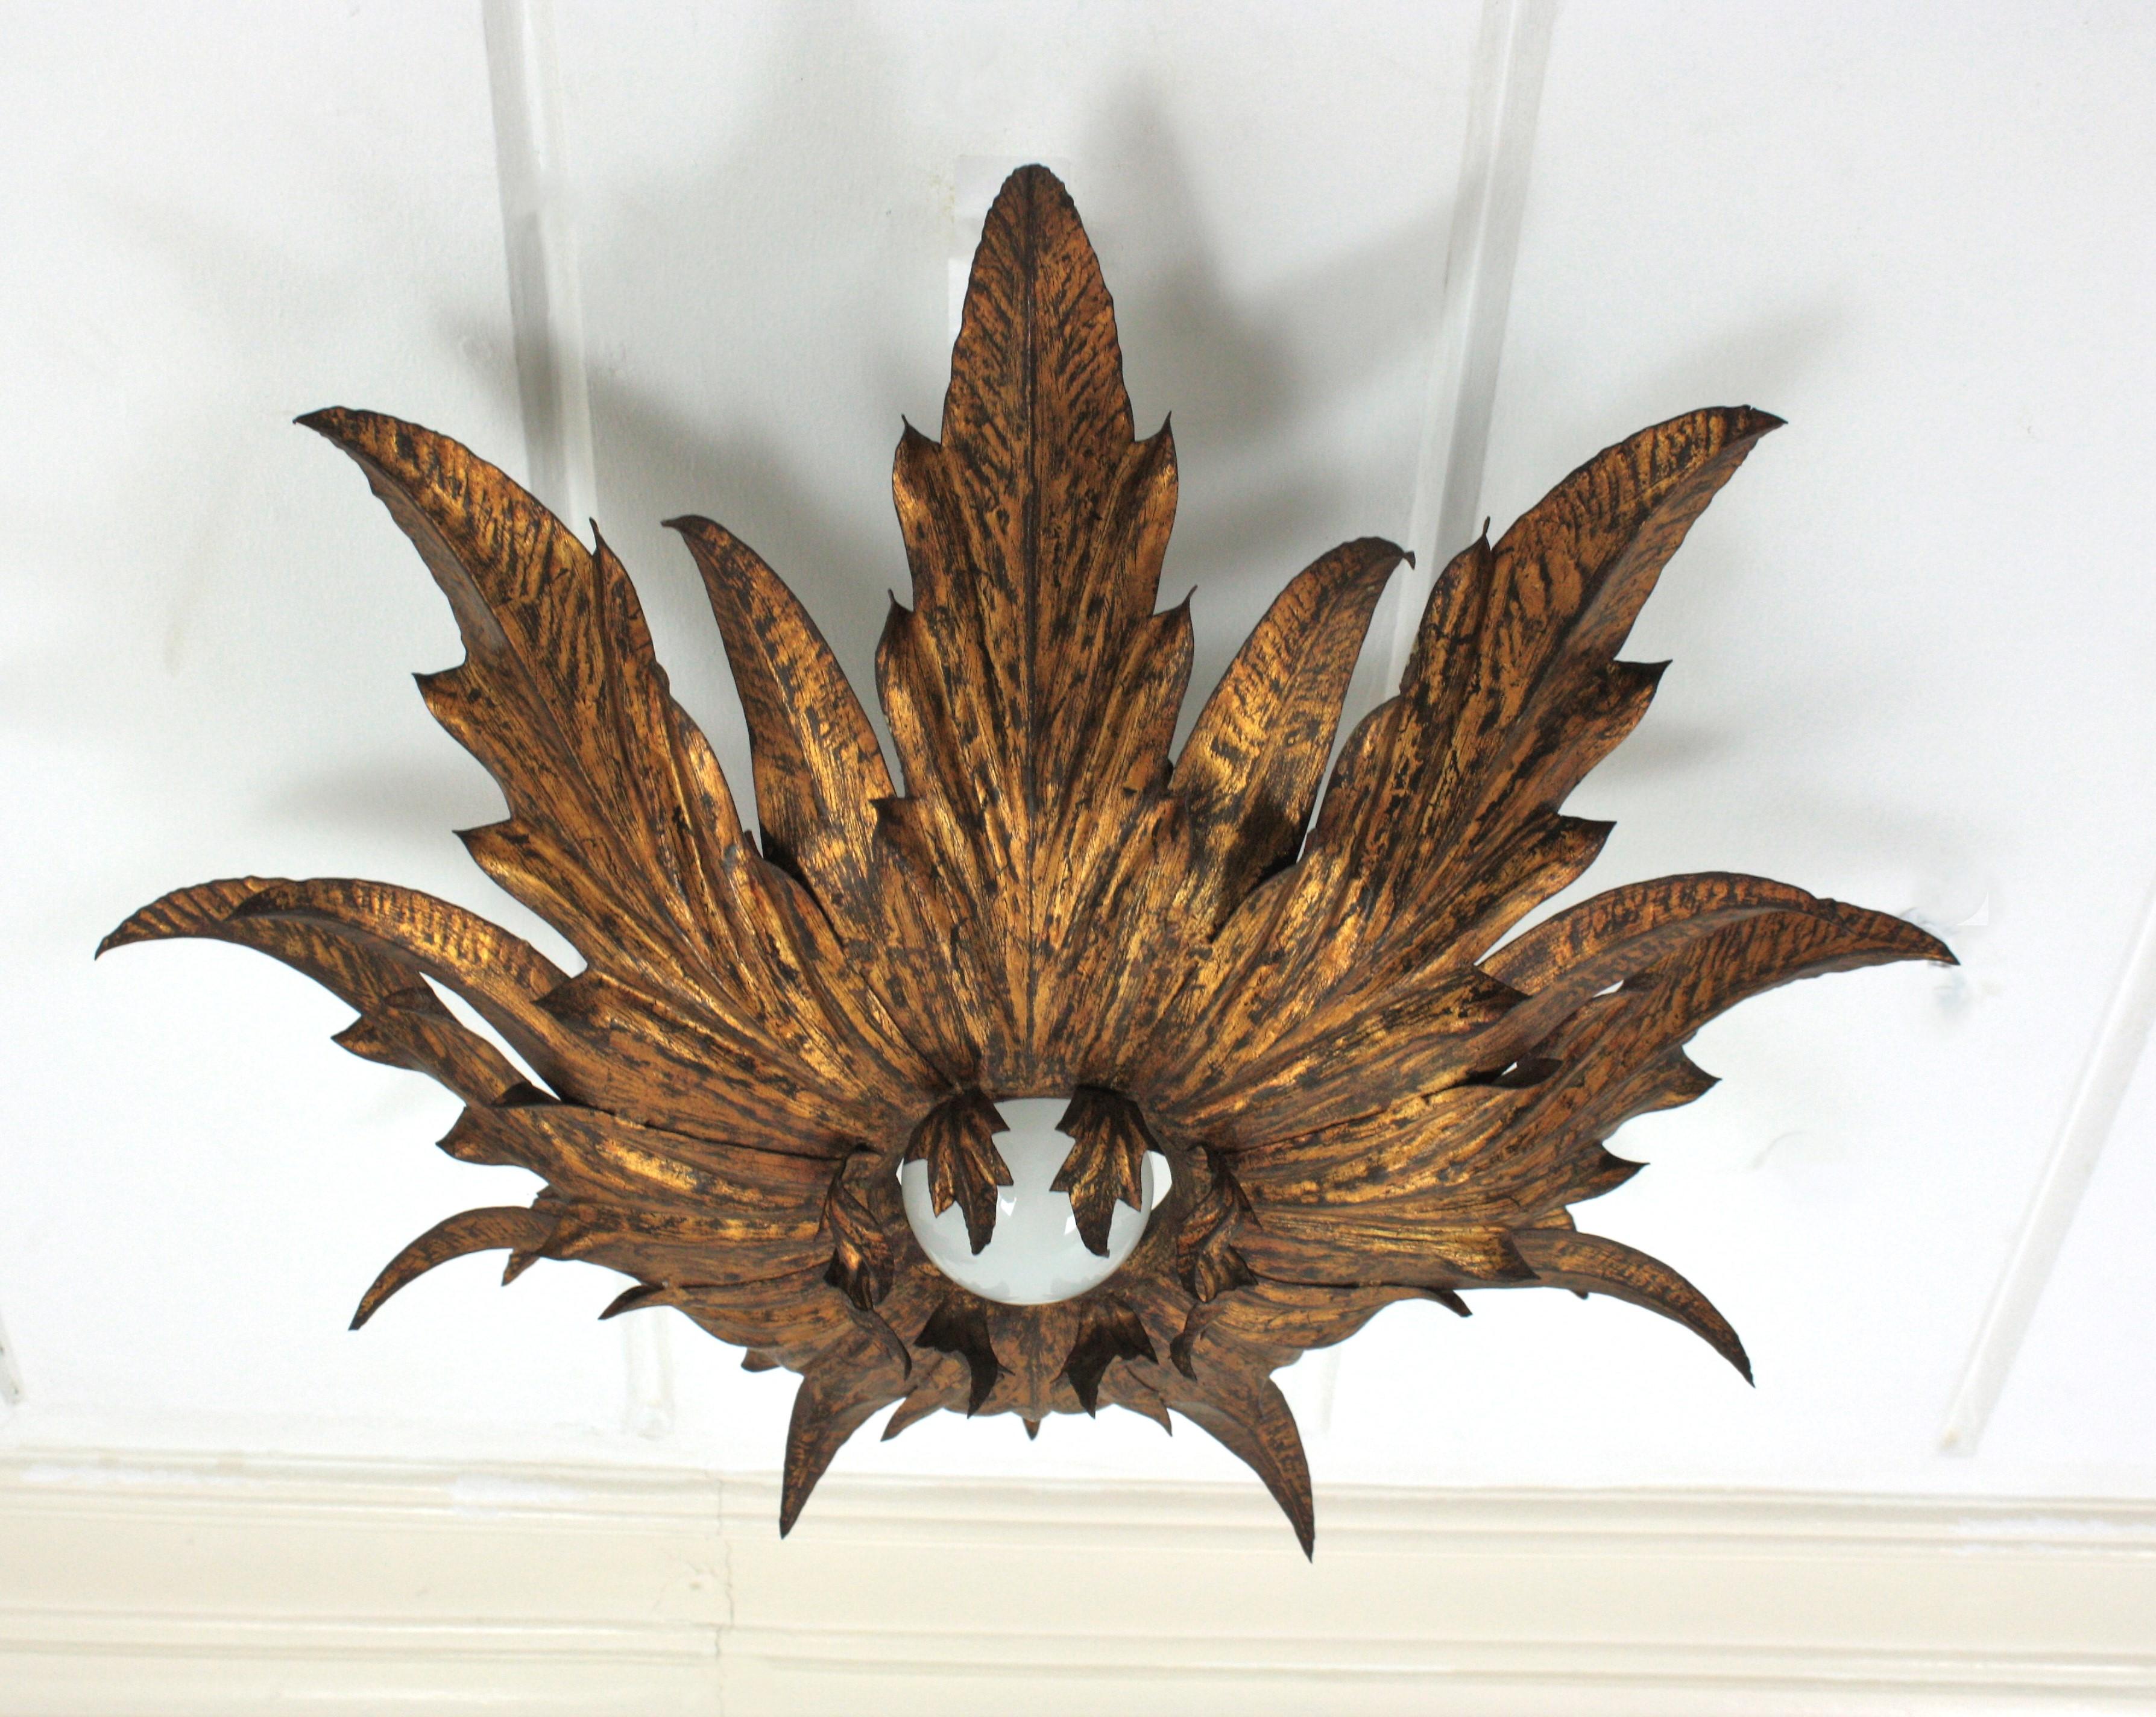 Stunning flower or sunburst ceiling light fixture, gilt iron, gold leaf, France, 1940s-1950s.
Large size.
This eye-catching ceiling lamp features a double layered leafed frame of leaves surrounding a central exposed bulb. A layer of small curved